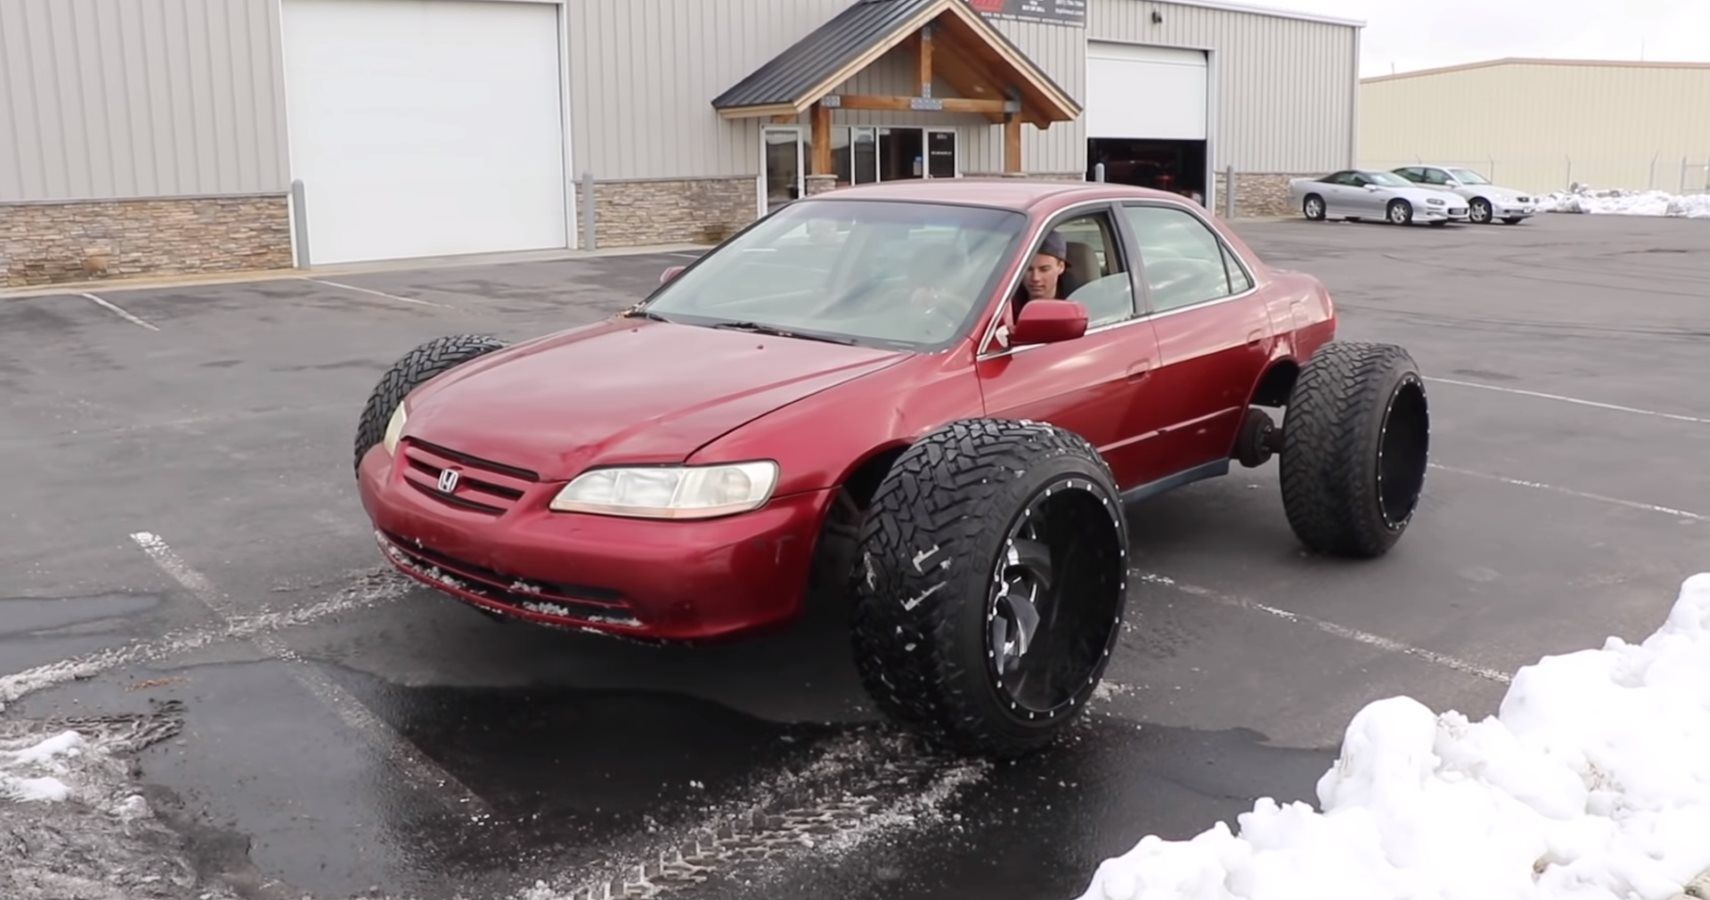 YouTuber Puts Giant Tires On Honda Accord, Somehow Gets Worse At Off-Roading